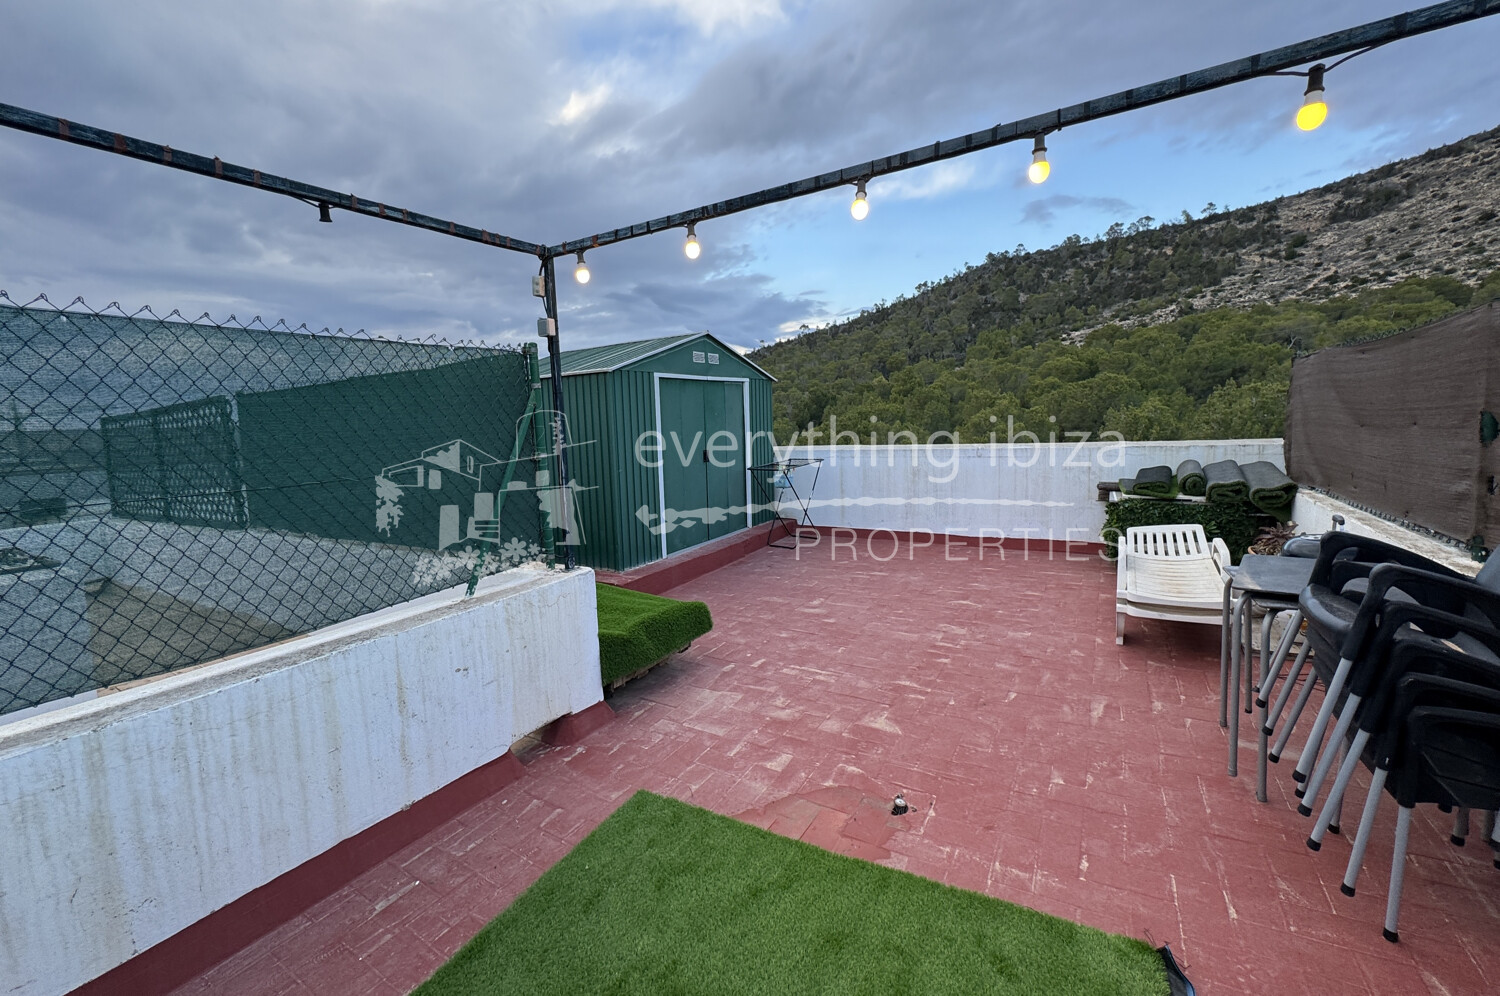 Three Bedroom Penthouse Apartment with Large Sea & Sunset View Roof Terrace, ref. 1678, for sale in Ibiza by everything ibiza Properties